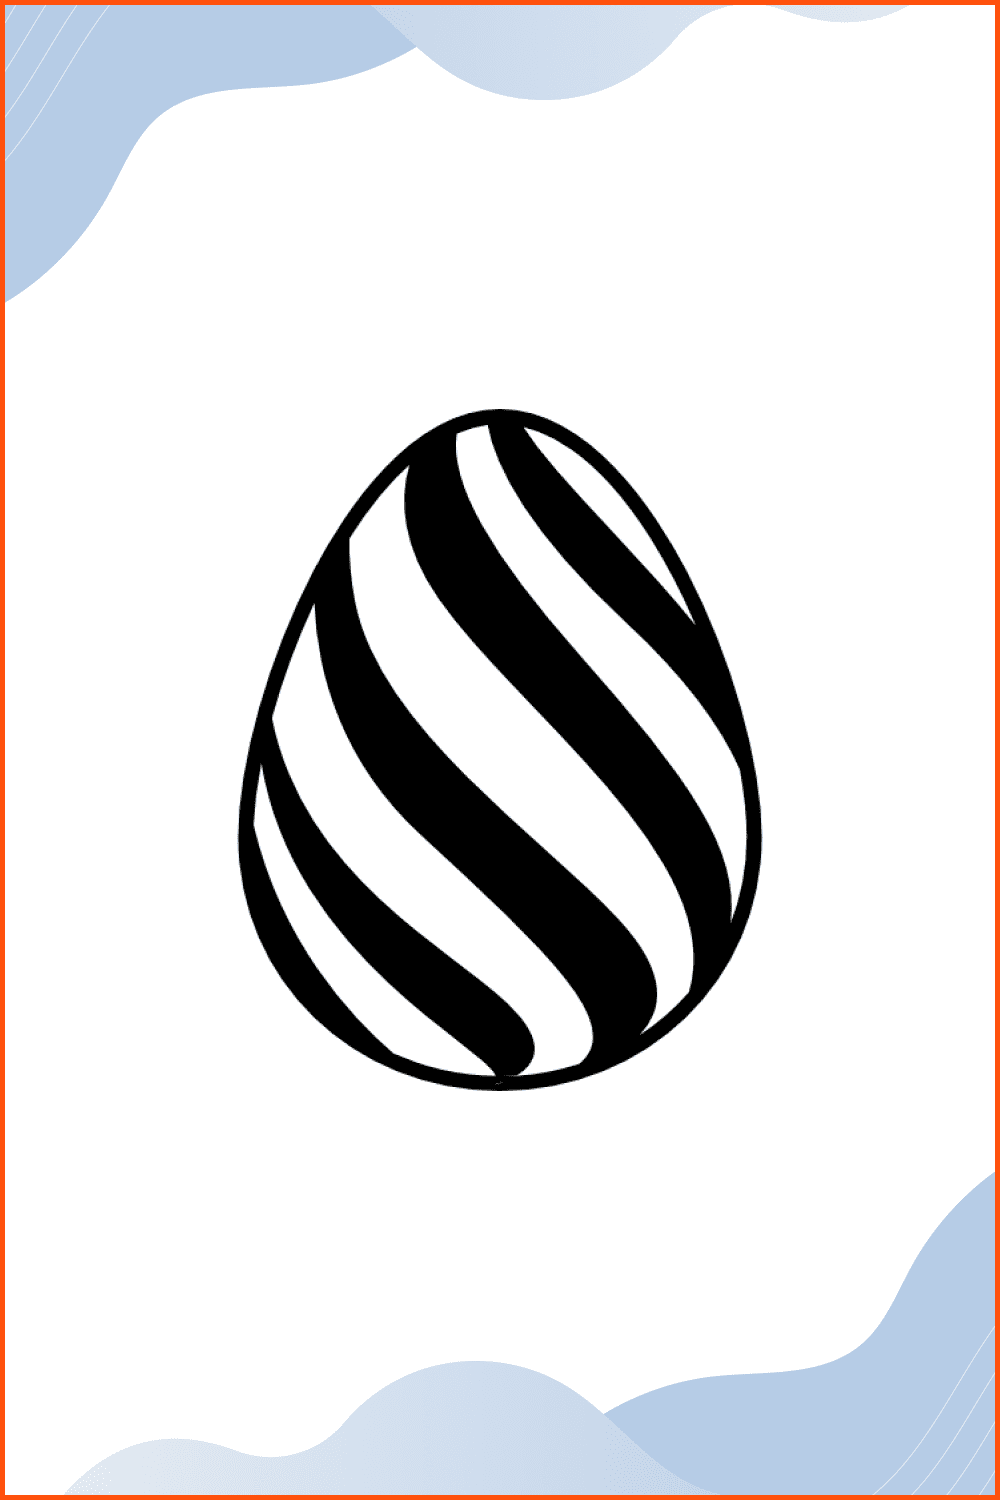 Easter egg with stripes.